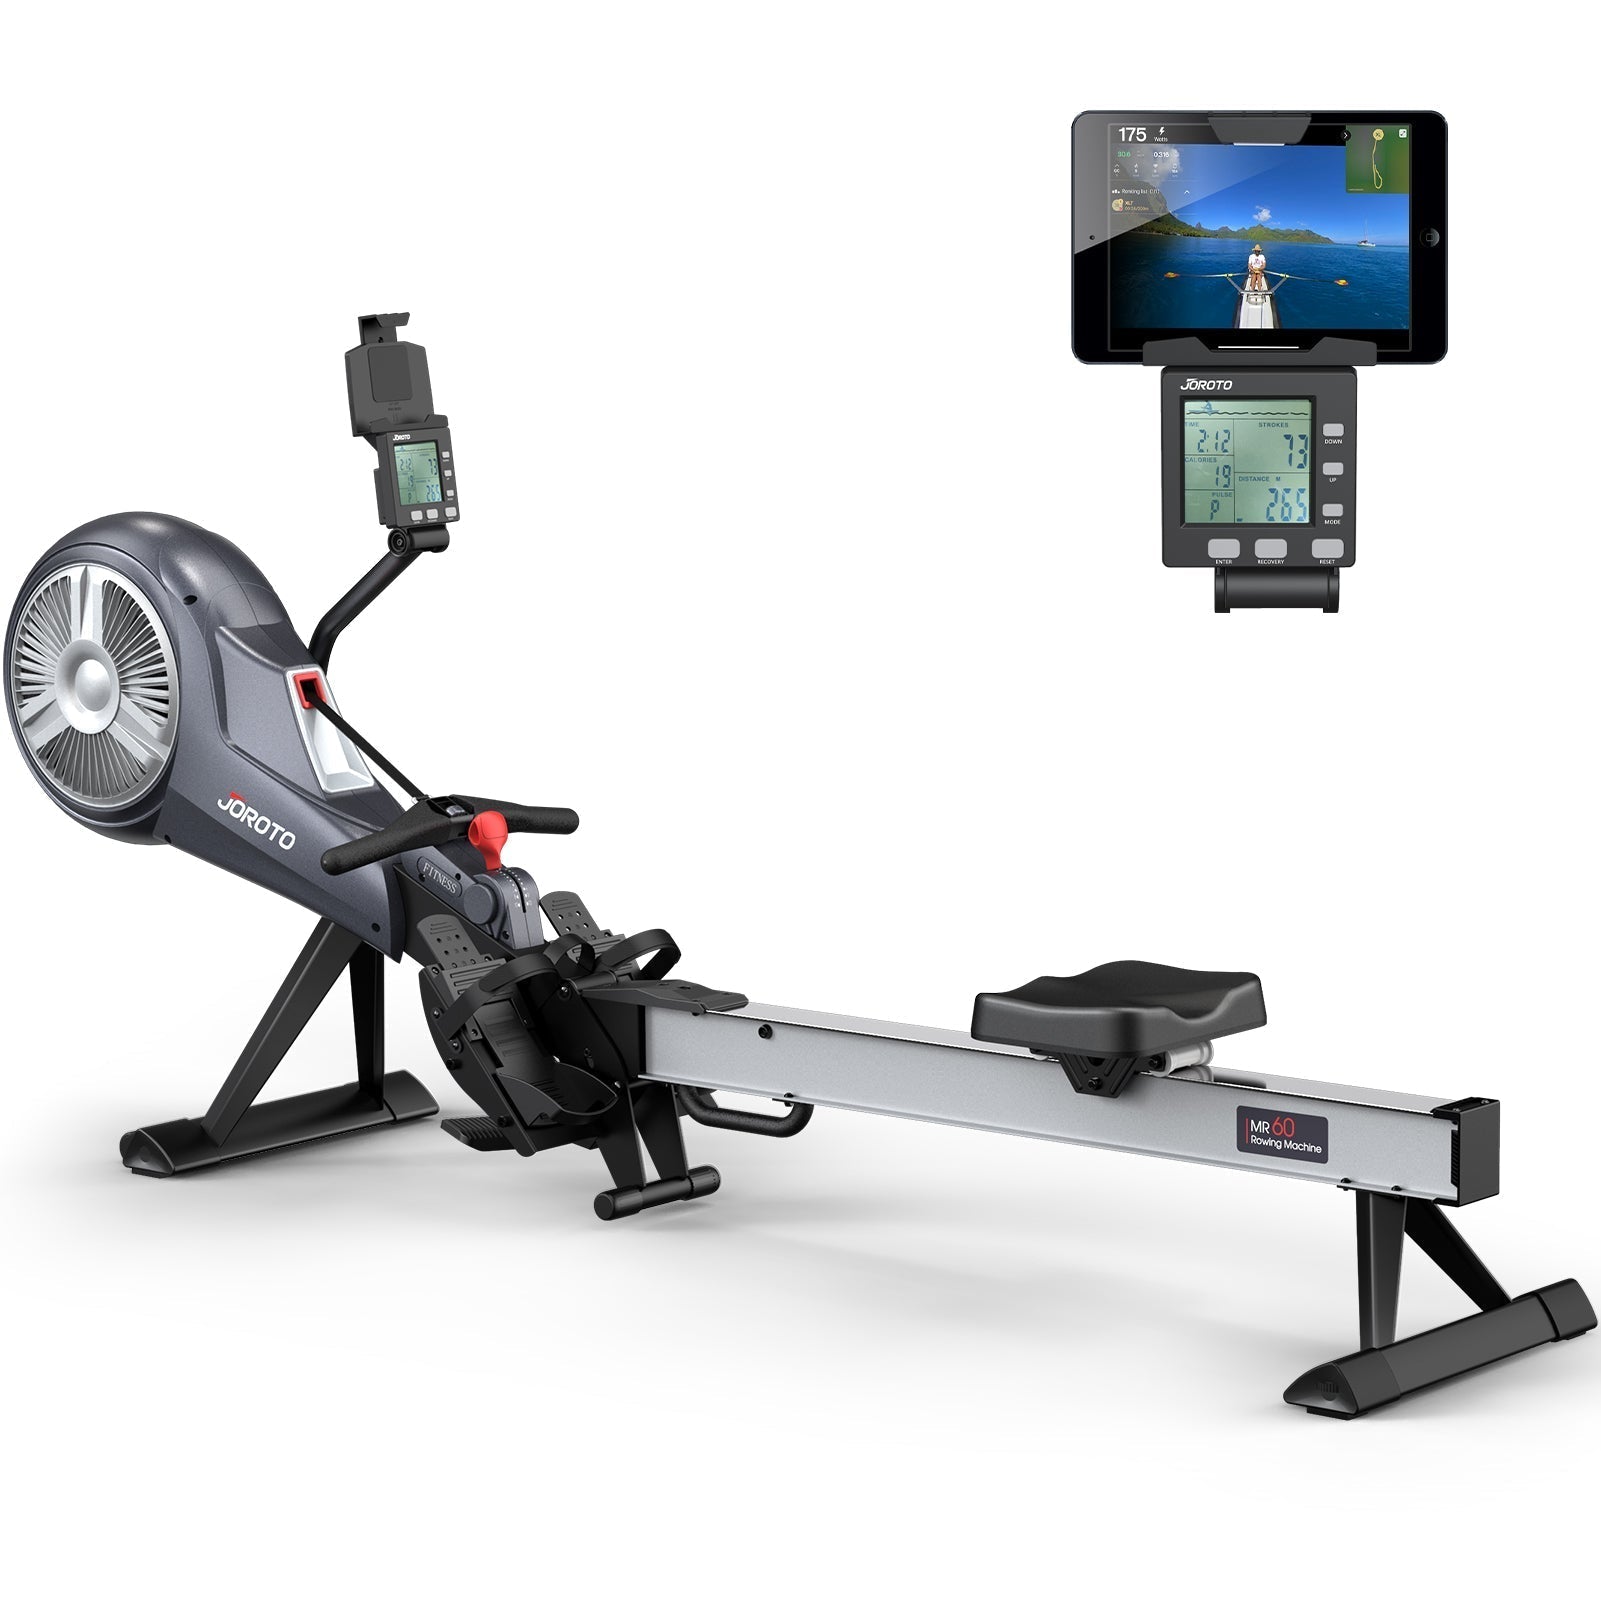 JOROTO Rowing Machine MR60 - Air & Magnetic Resistance Rowing Machines Support Bluetooth and Kinomap, Commercial Grade Rower Machine with Smart Backlit Monitor - jorotofitness